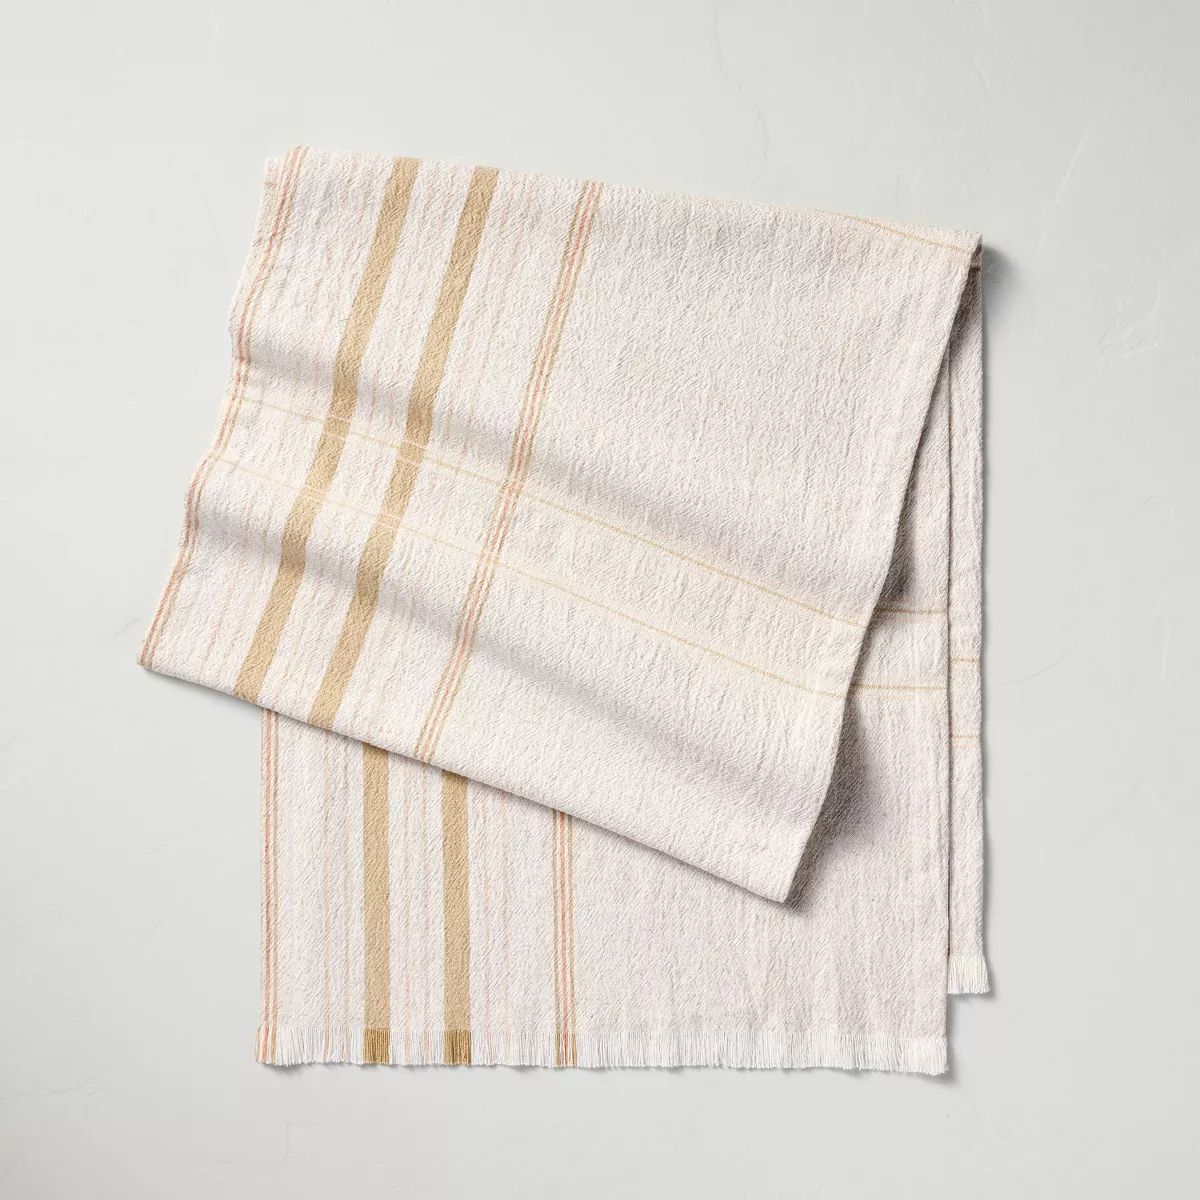 20"x90" Offset Plaid Woven Table Runner Light Tan/Blush - Hearth & Hand™ with Magnolia | Target